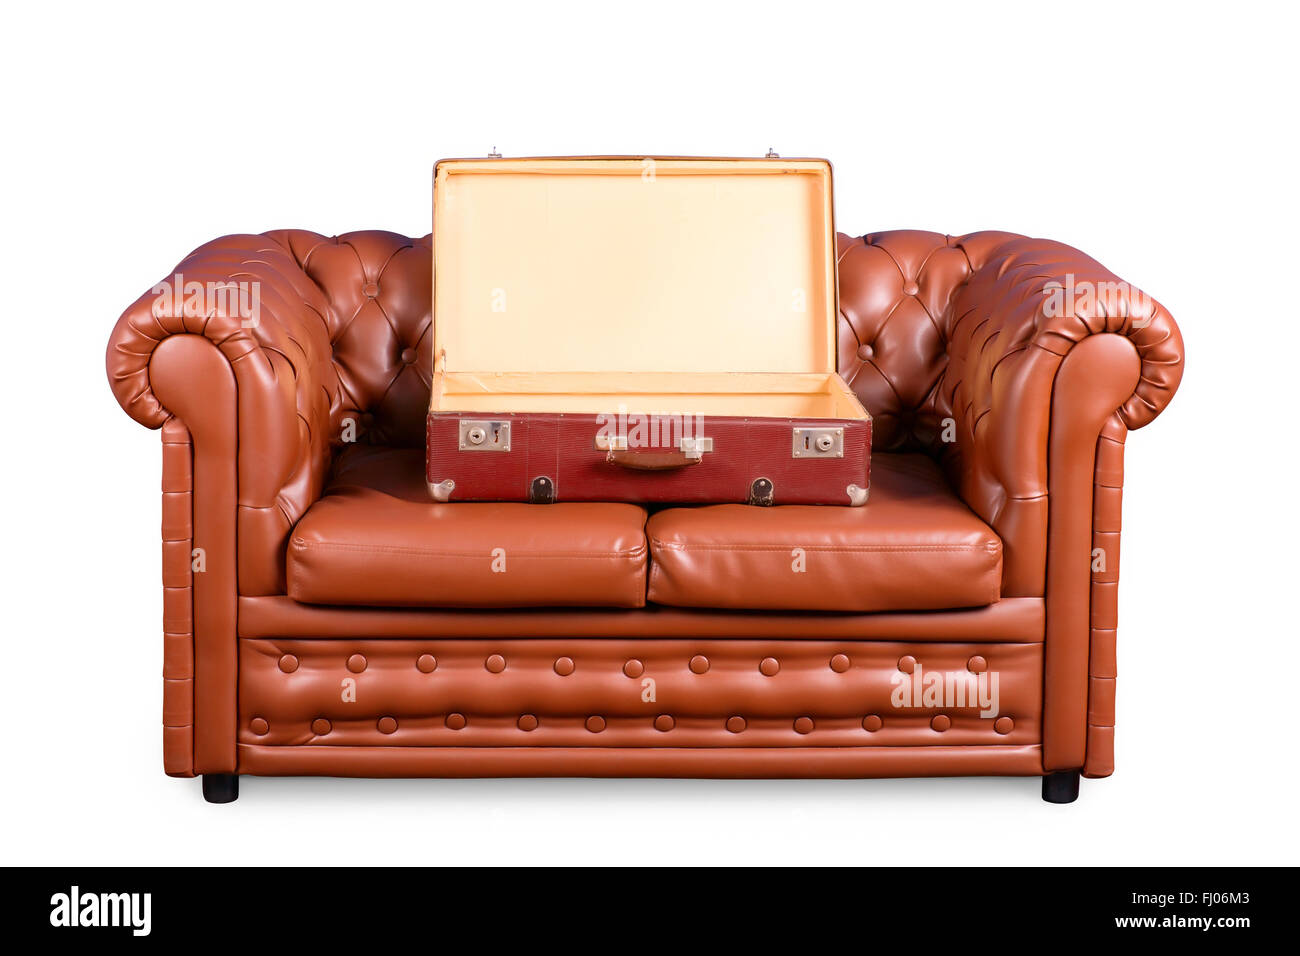 Le vieux cuir canapé avec une valise vide vintage isolated on white with clipping path Banque D'Images